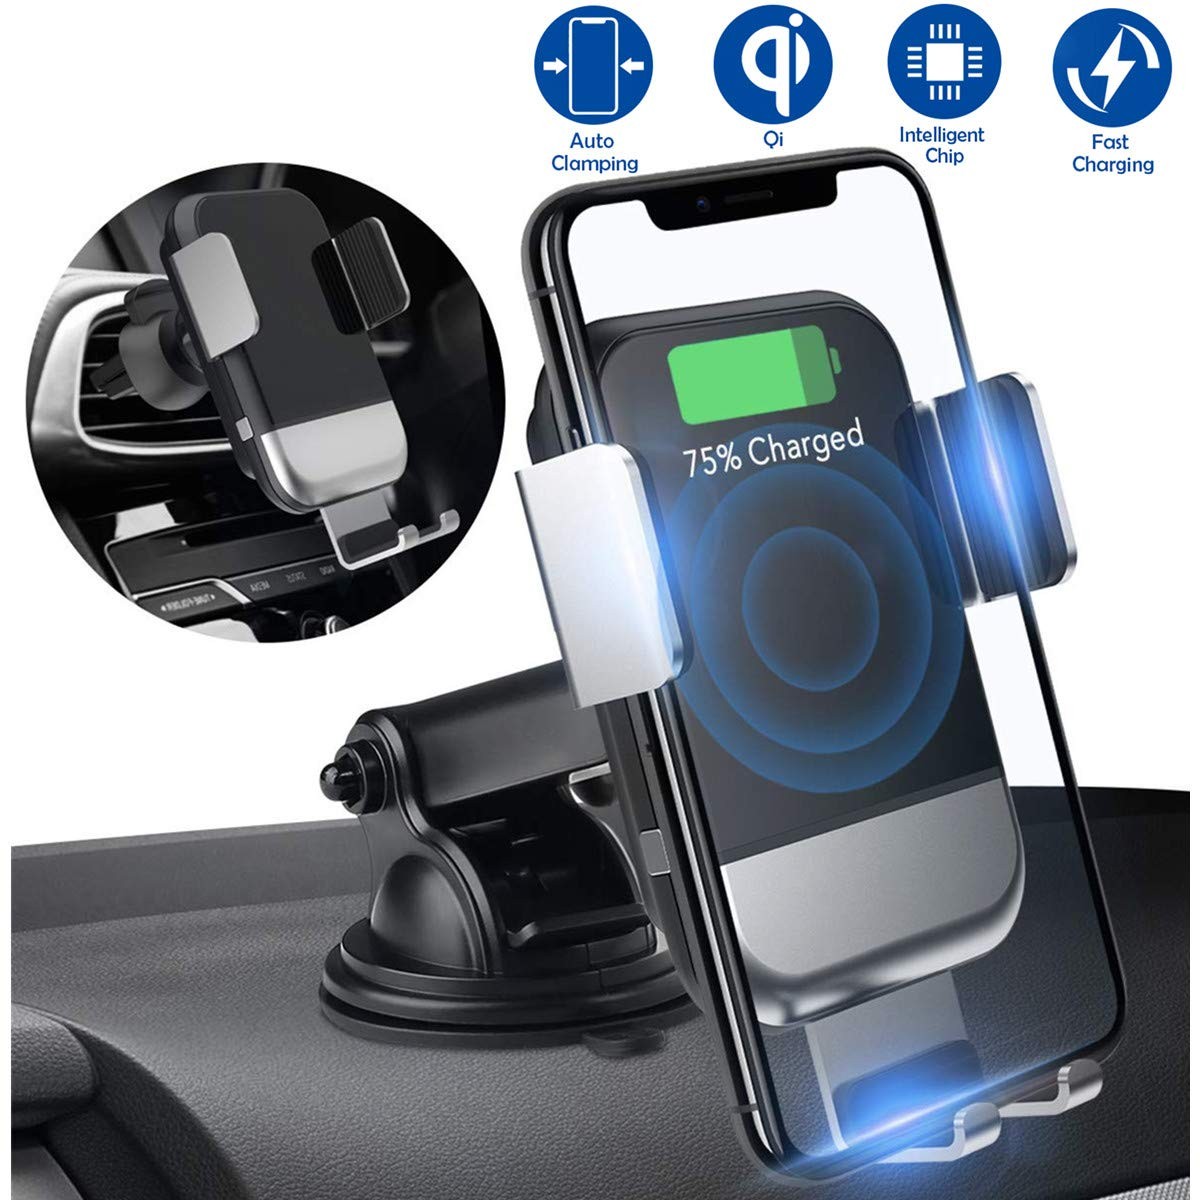 Souleader Wireless Car Charger Mount Auto Clamping 10W 7 5W Qi Fast Charging Car Mount Windshield Dashboard Air Vent Phone Holder for iPhone Xs Xs